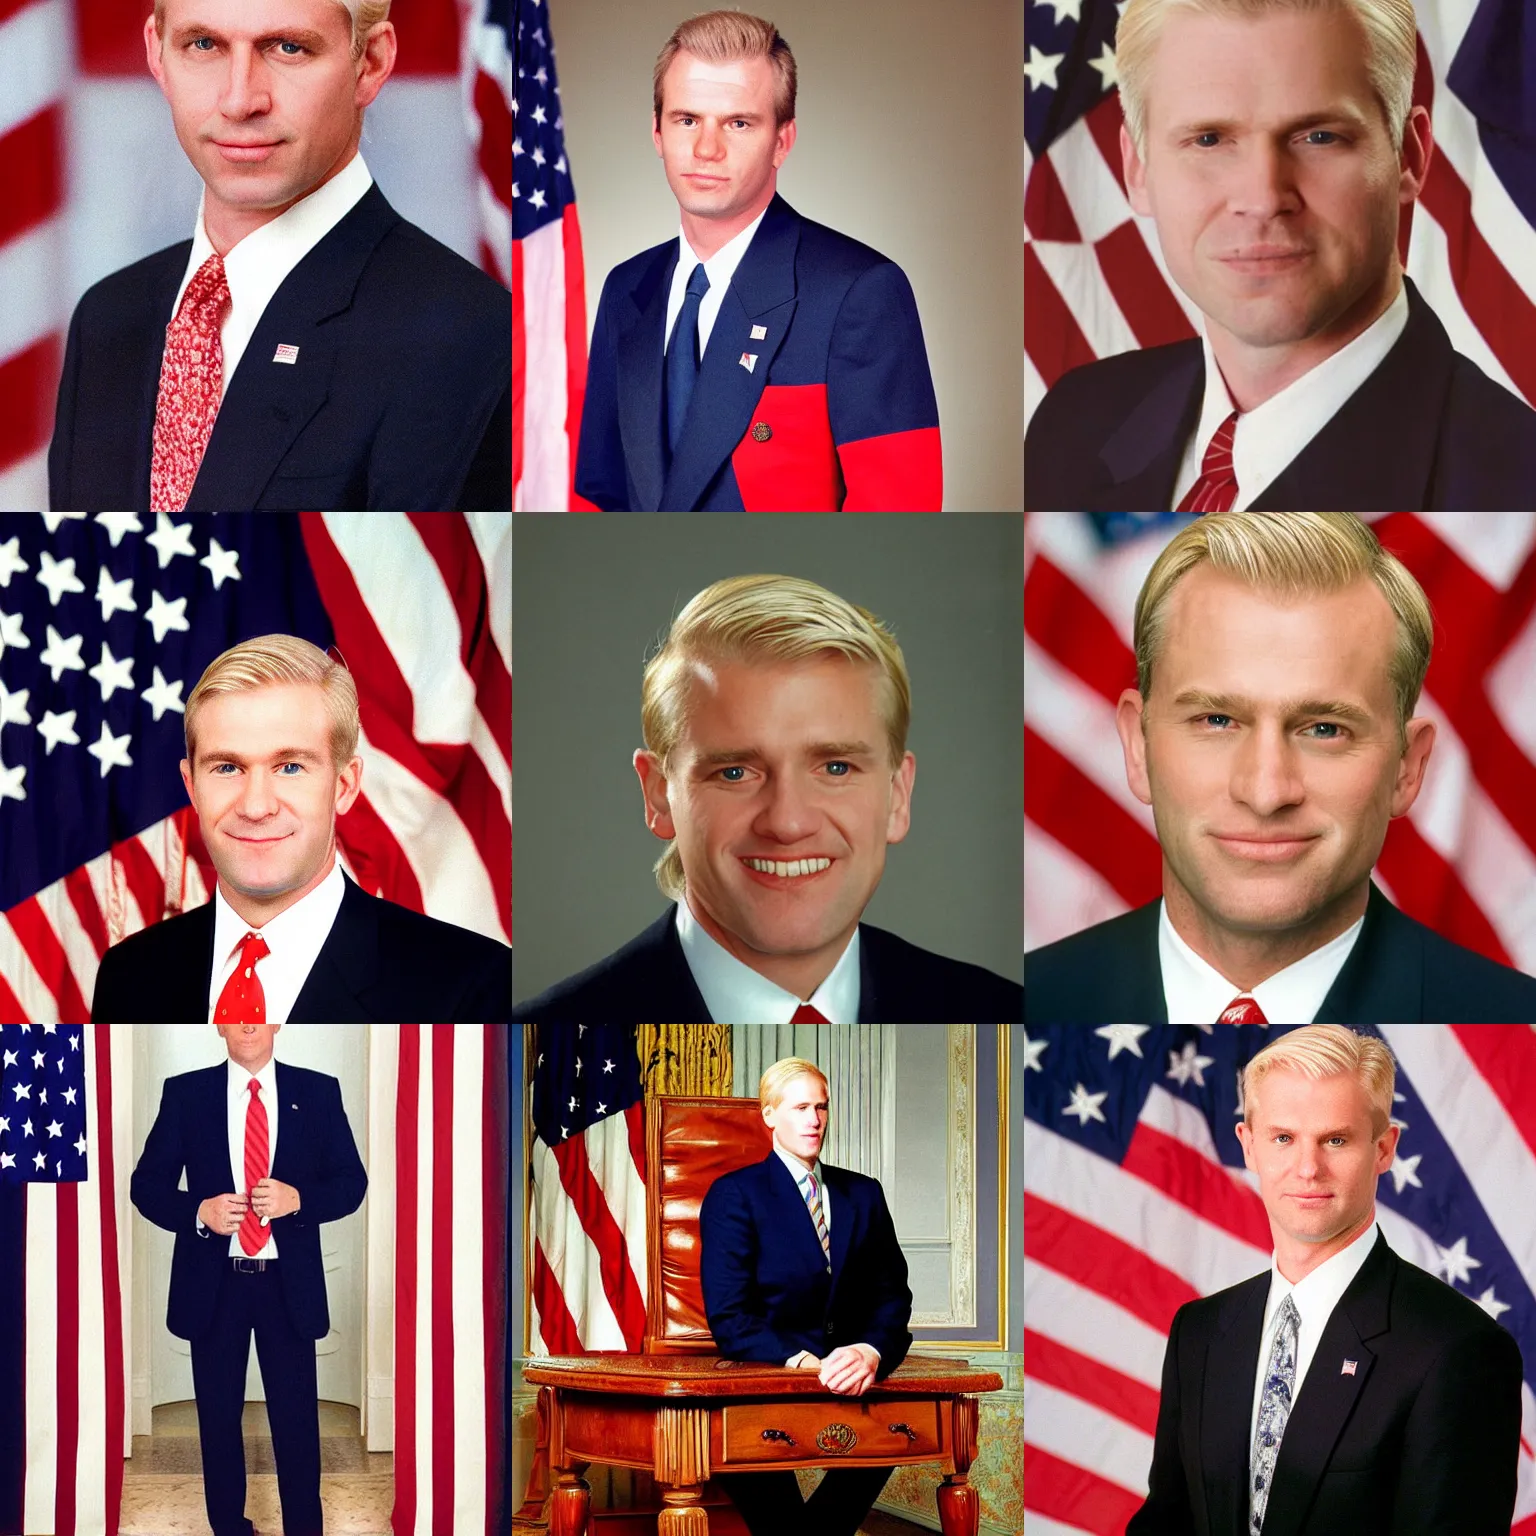 Prompt: Official Portrait of the President of the United States, 1998. He is a 45 year old white man with blonde hair and a handsome face. He is wearing a suit in front of the American Flag